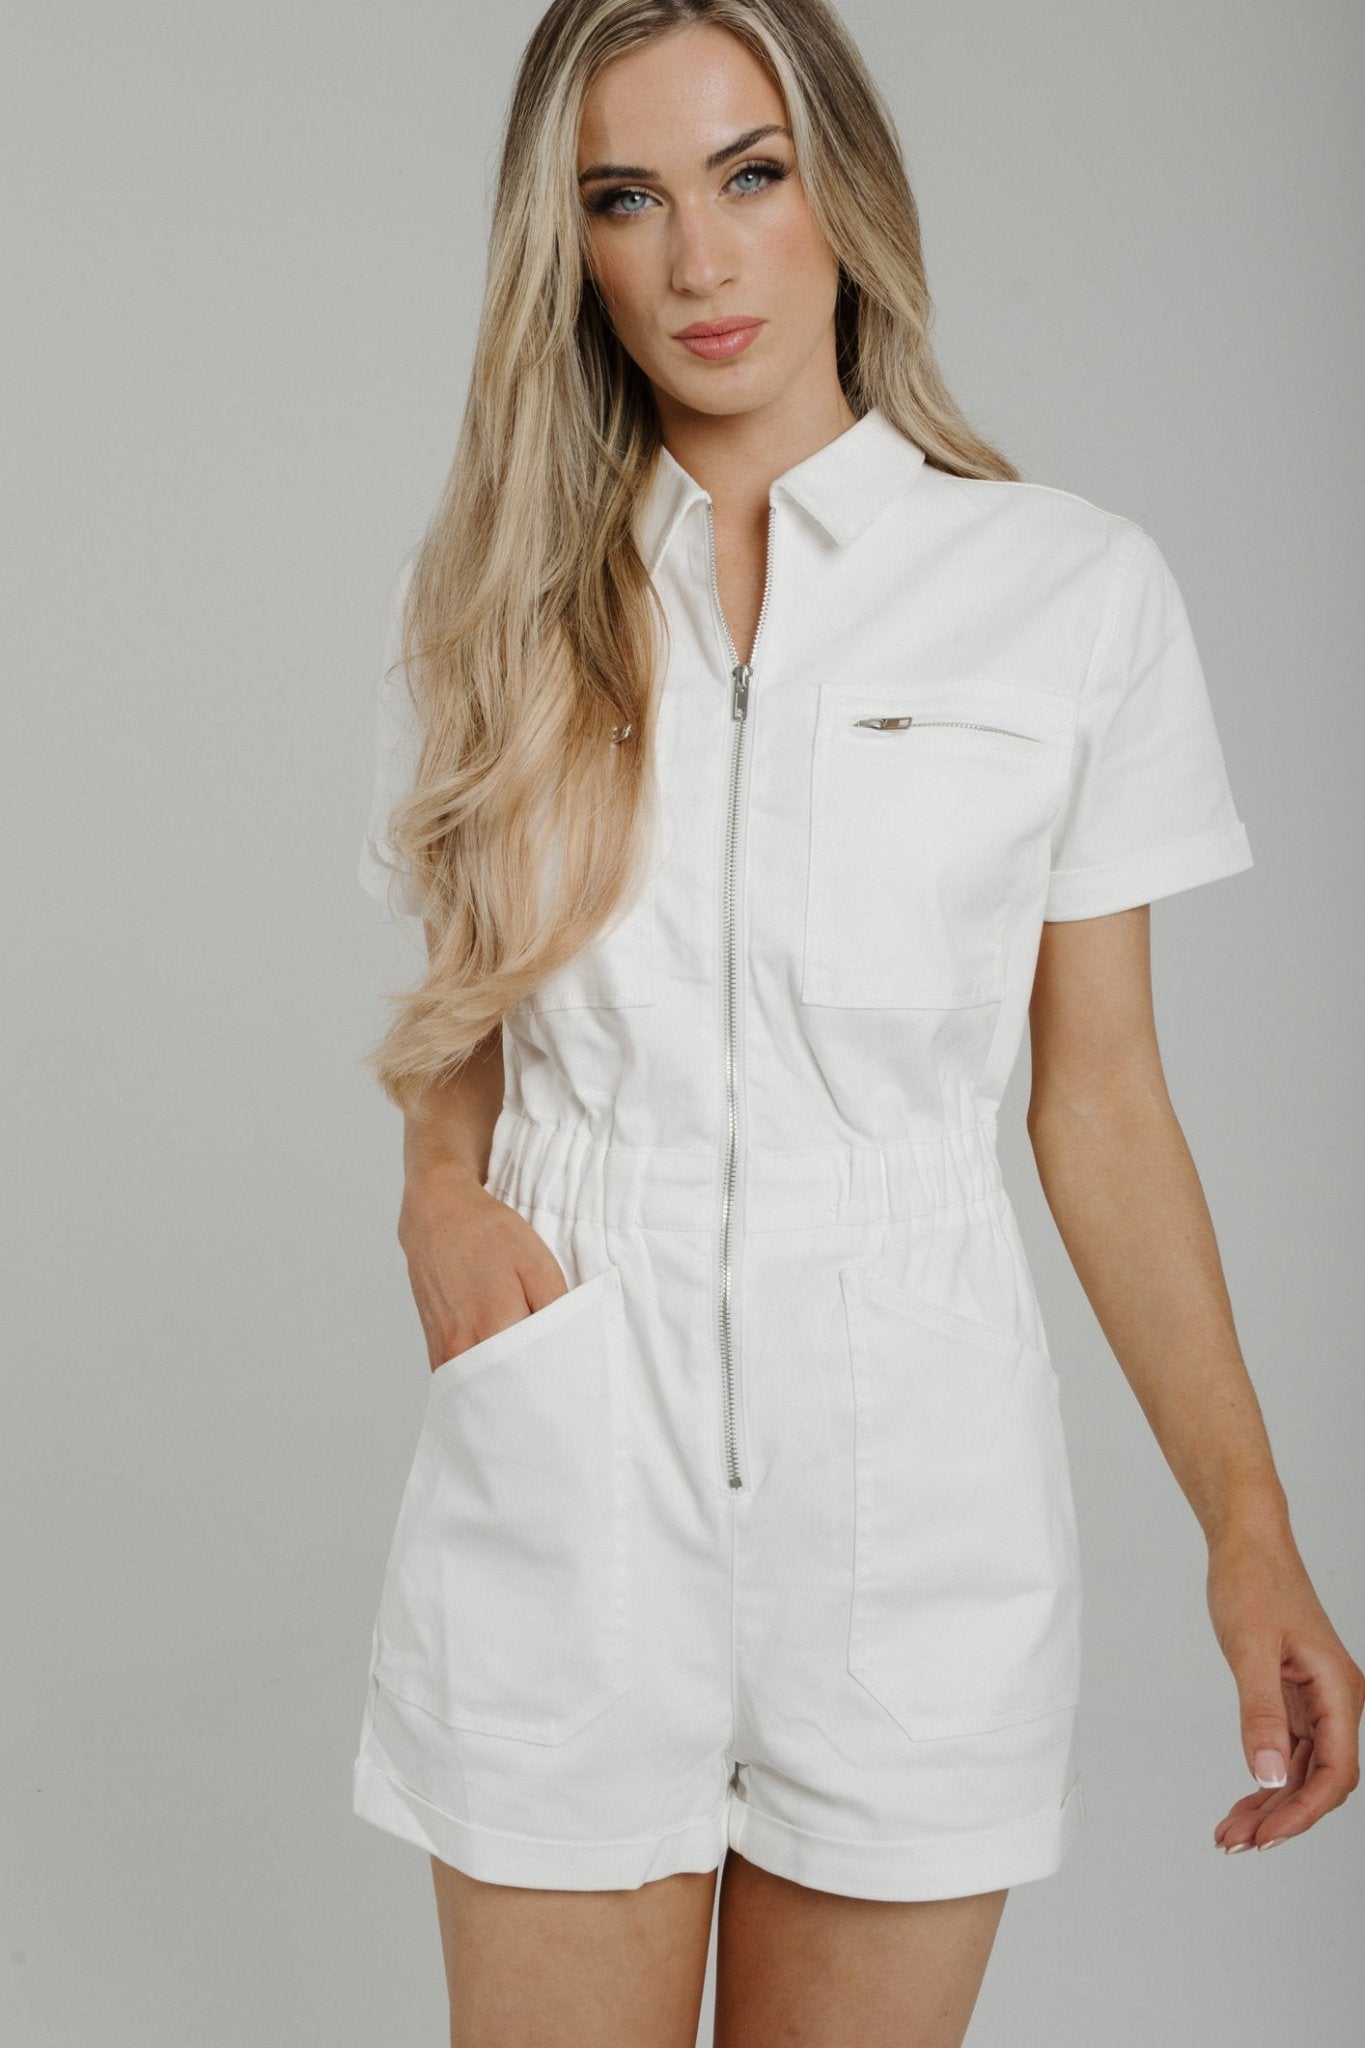 Daisy Zip Front Playsuit In White - The Walk in Wardrobe